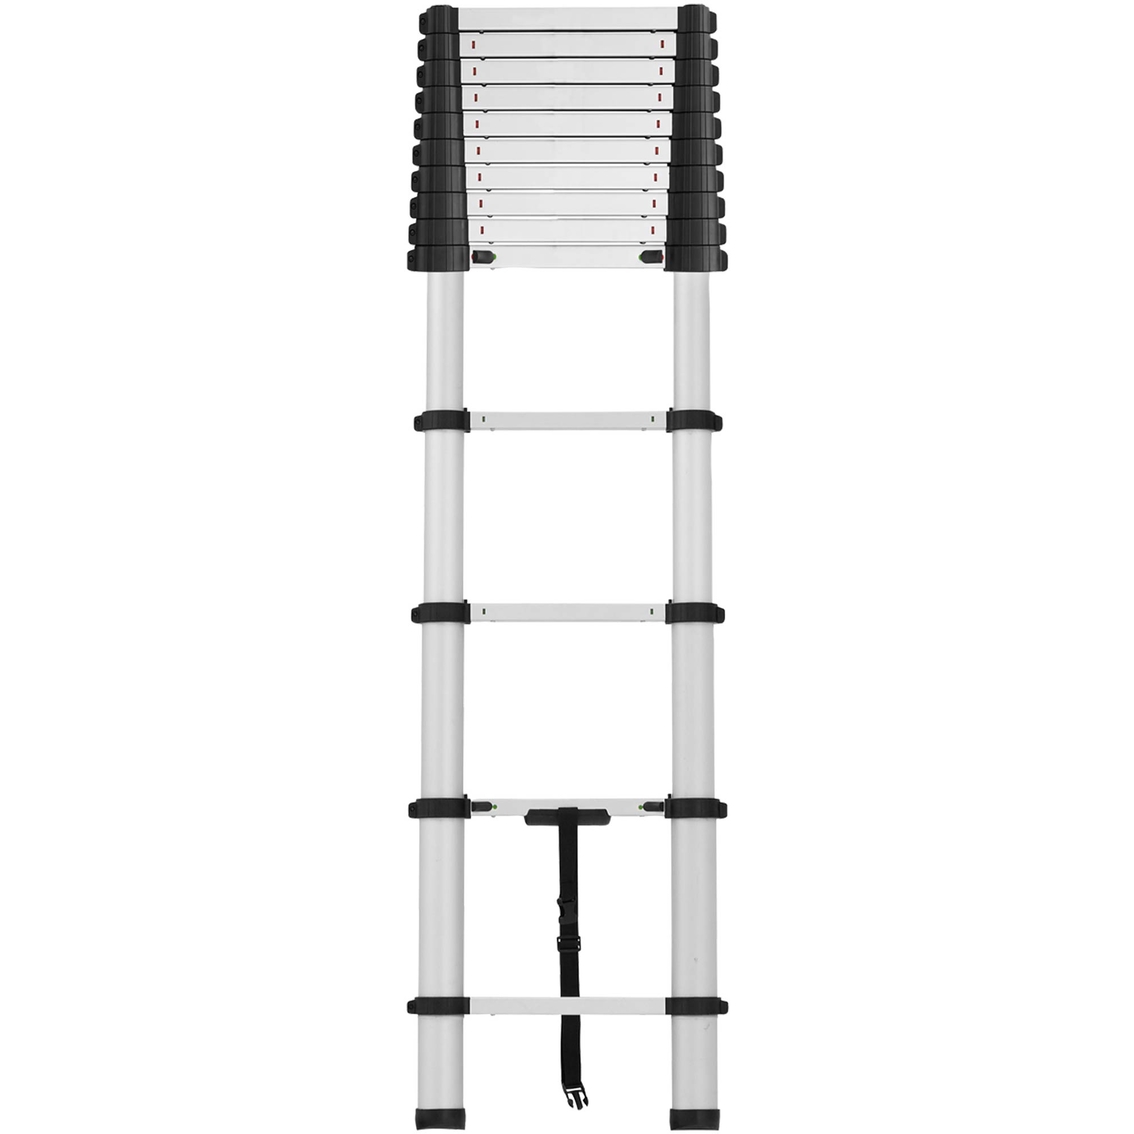 Cosco 14 Ft. Telescoping Ladder | Ladders & Stands | Patio, Garden Cosco 14 Ft Telescoping Ladder